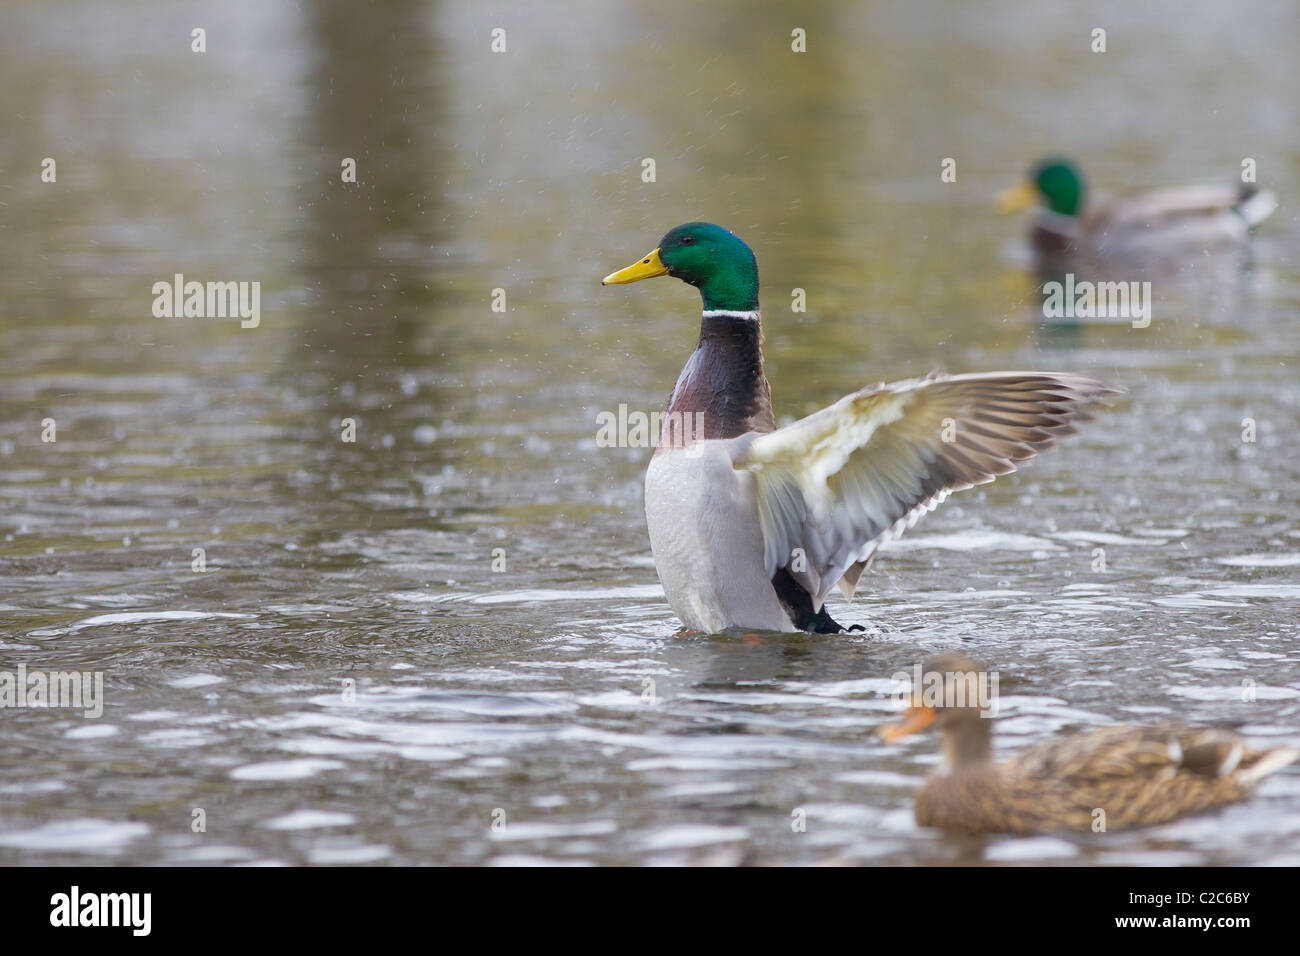 Landing Duck in detailed view over water Stock Photo